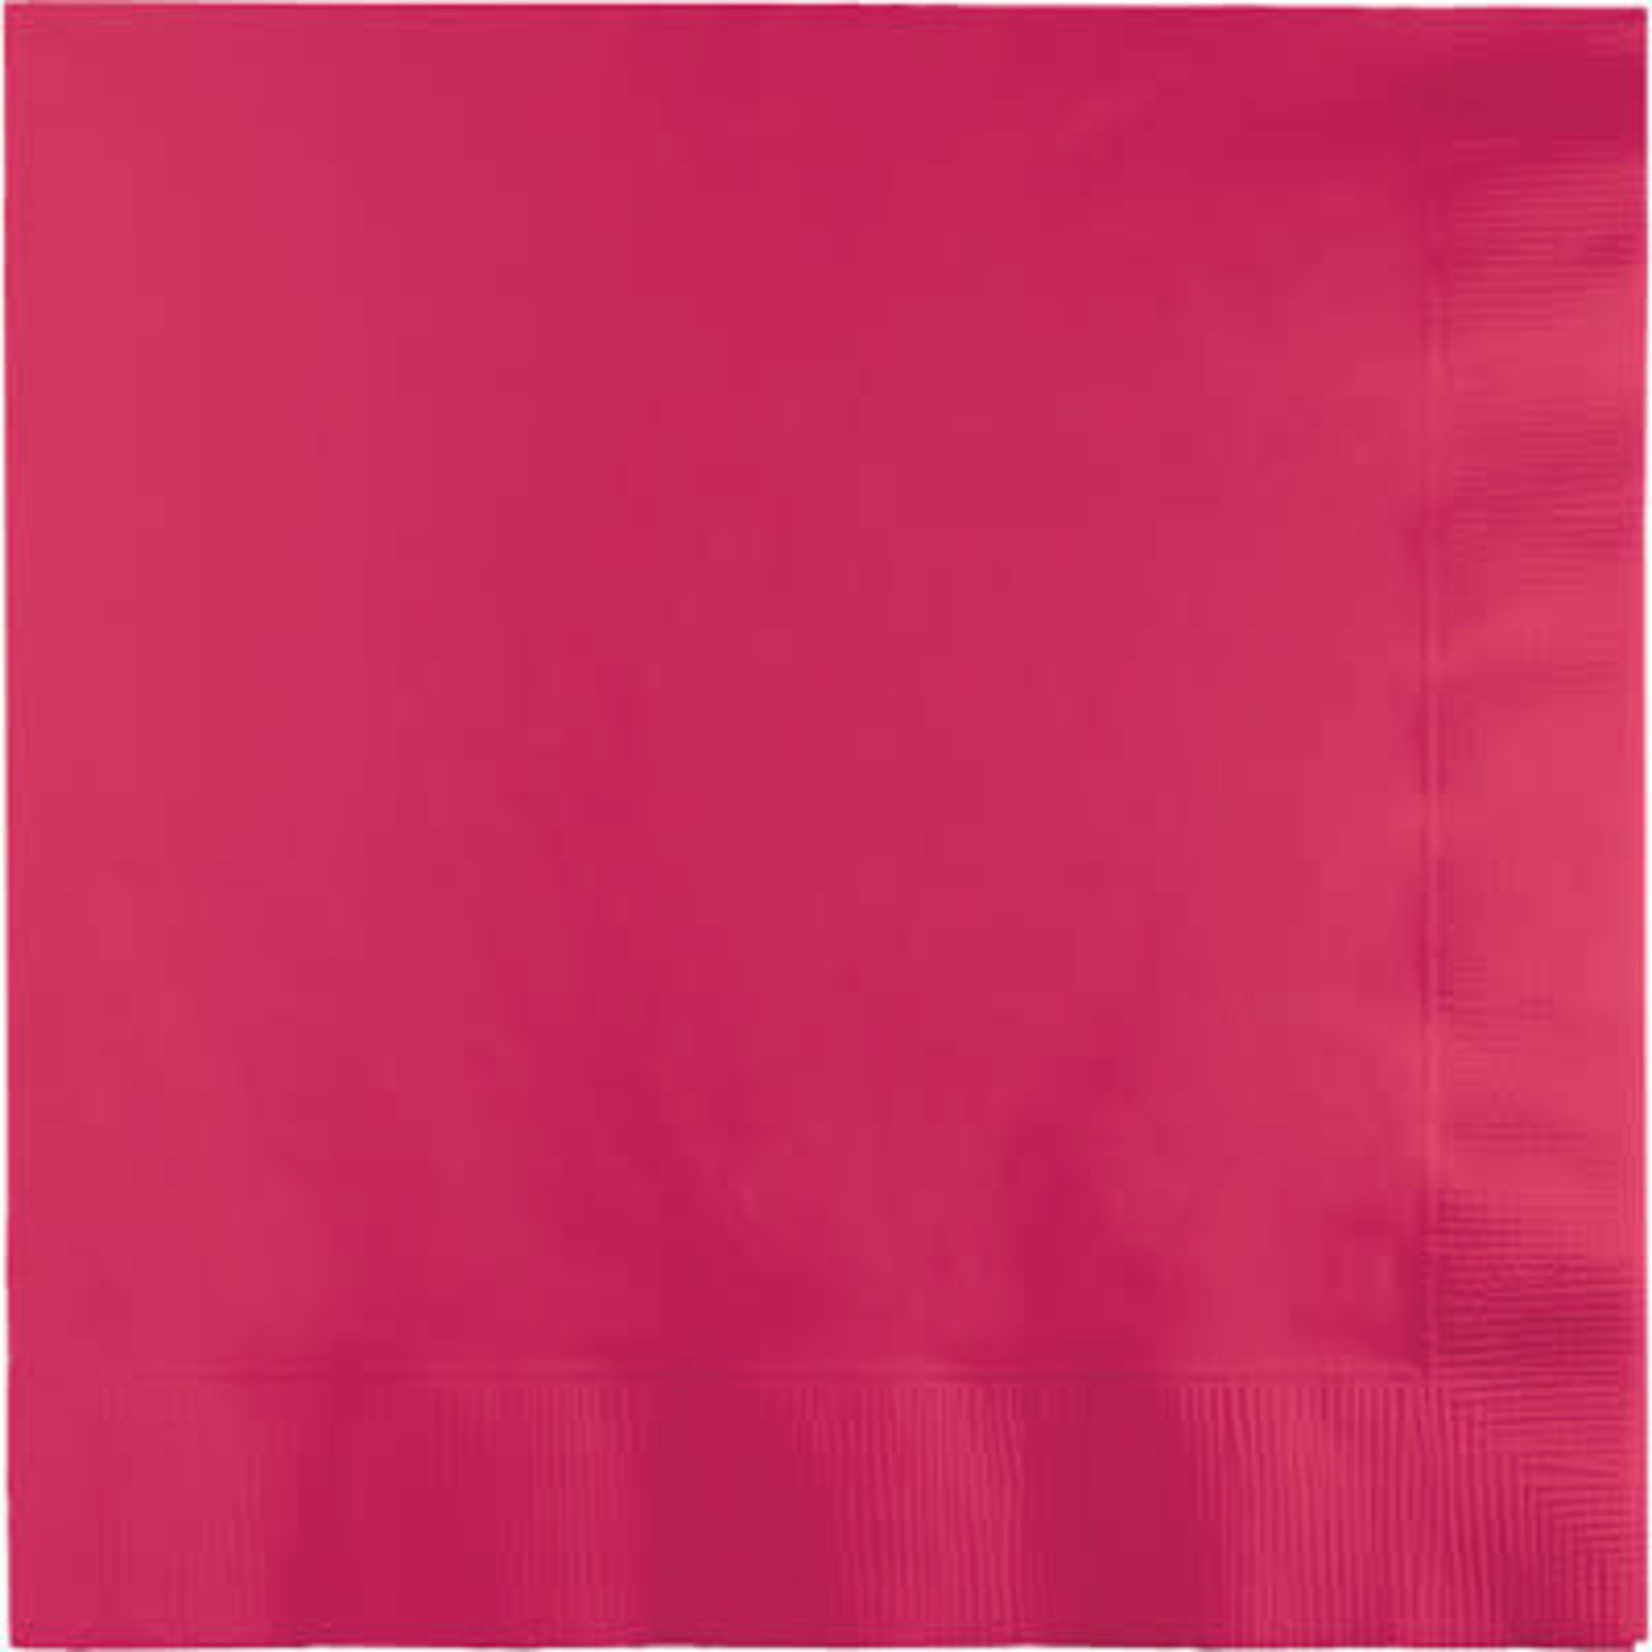 Touch of Color Magenta Pink 3-Ply Dinner Napkins - 25ct.